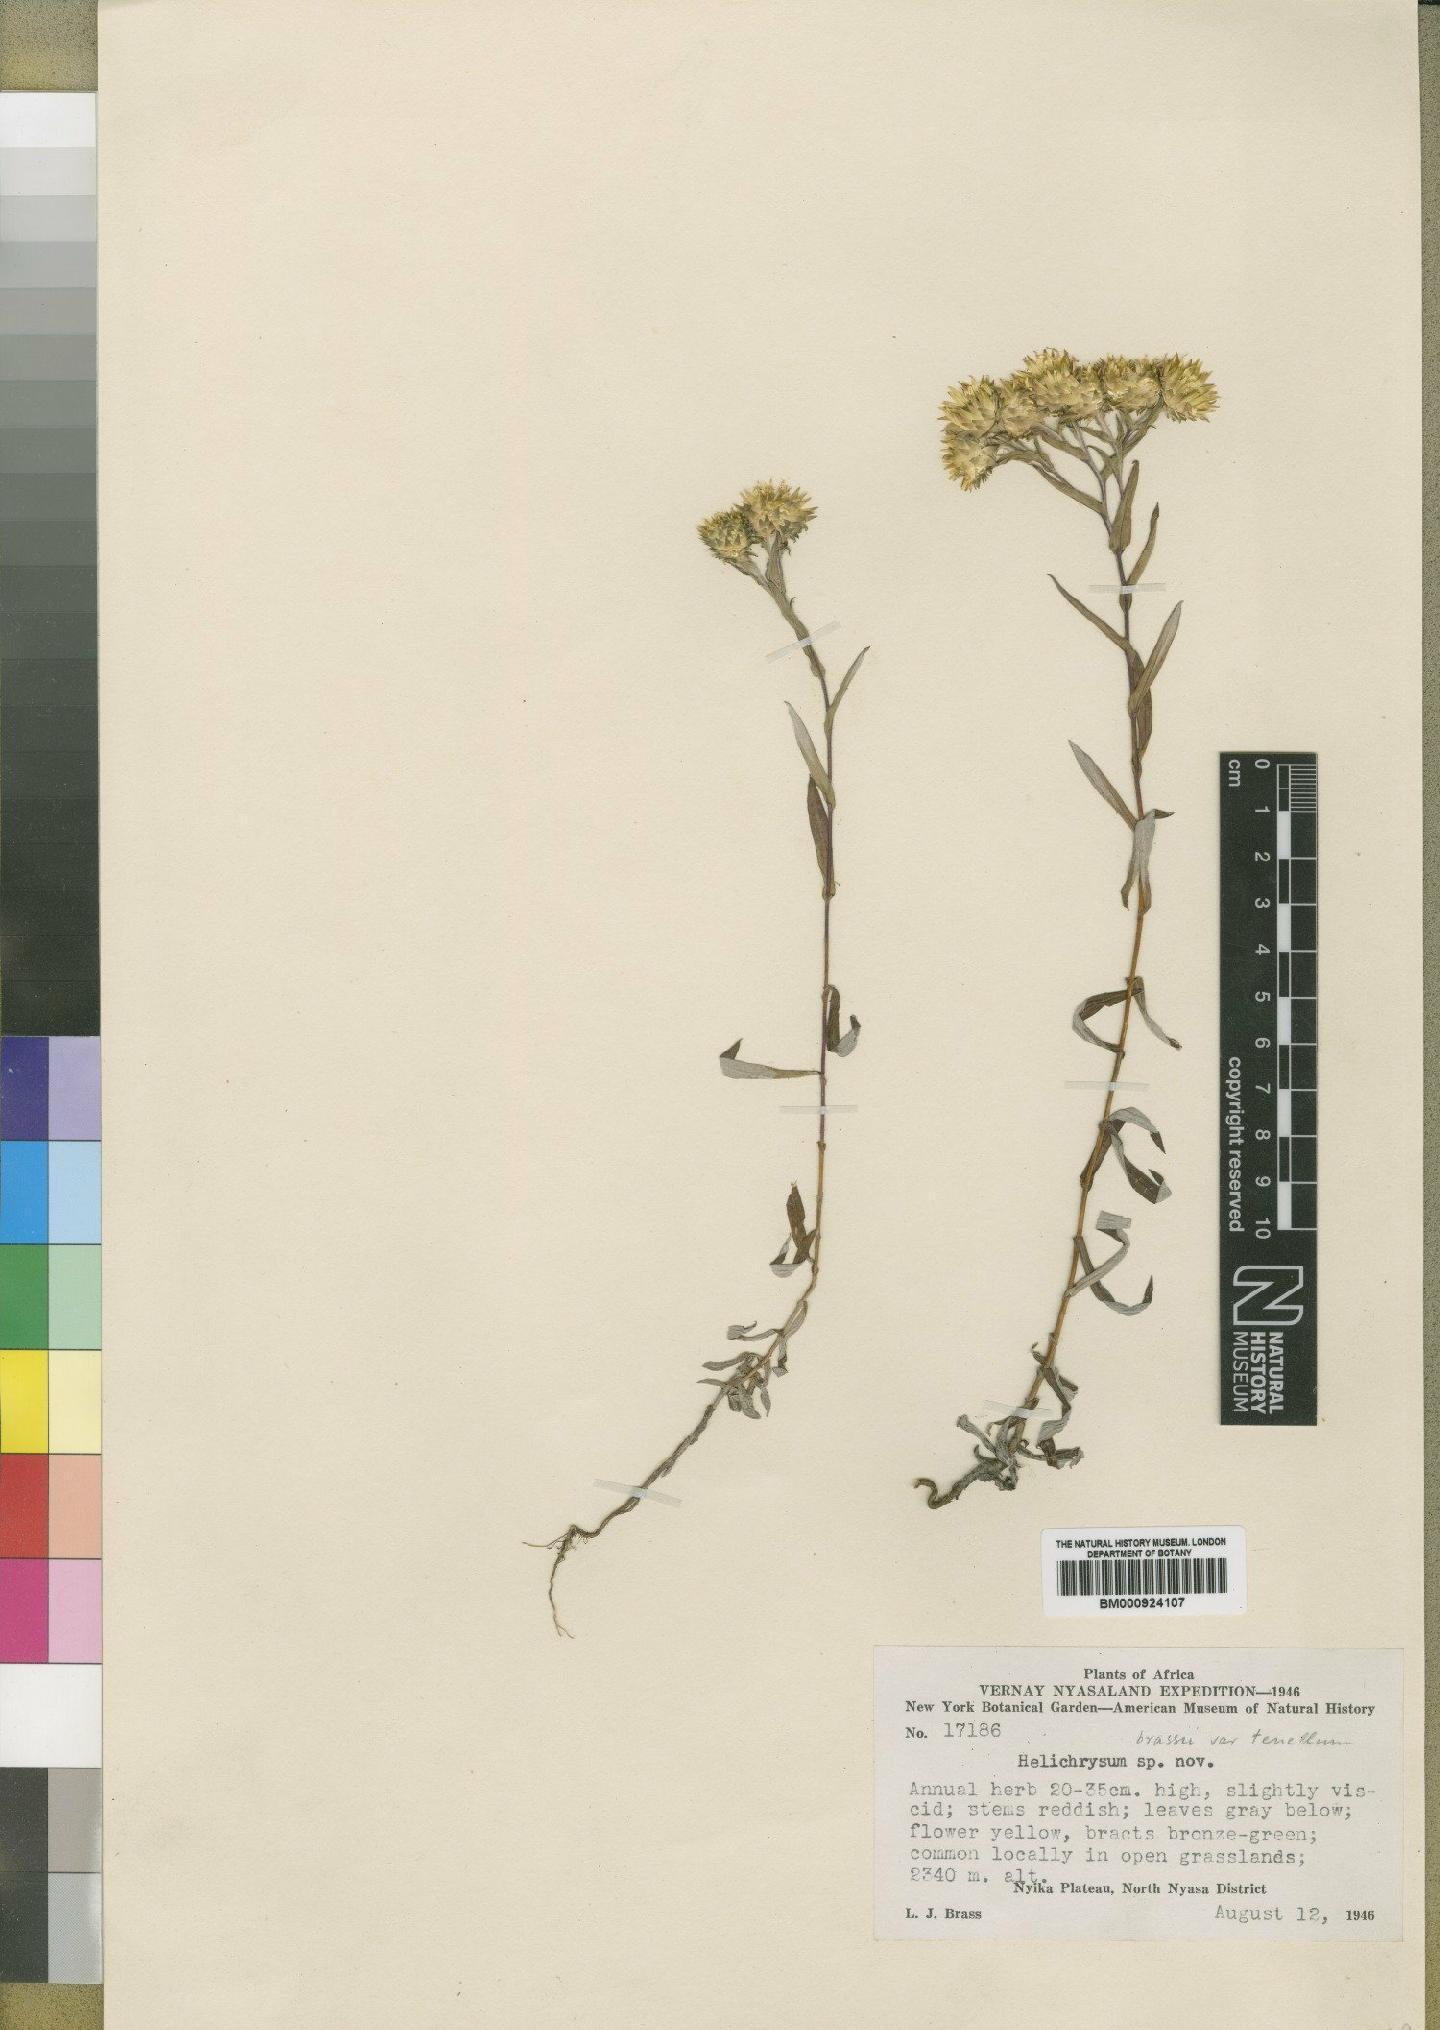 To NHMUK collection (Helichrysum brassii Brenan; Type; NHMUK:ecatalogue:4529135)